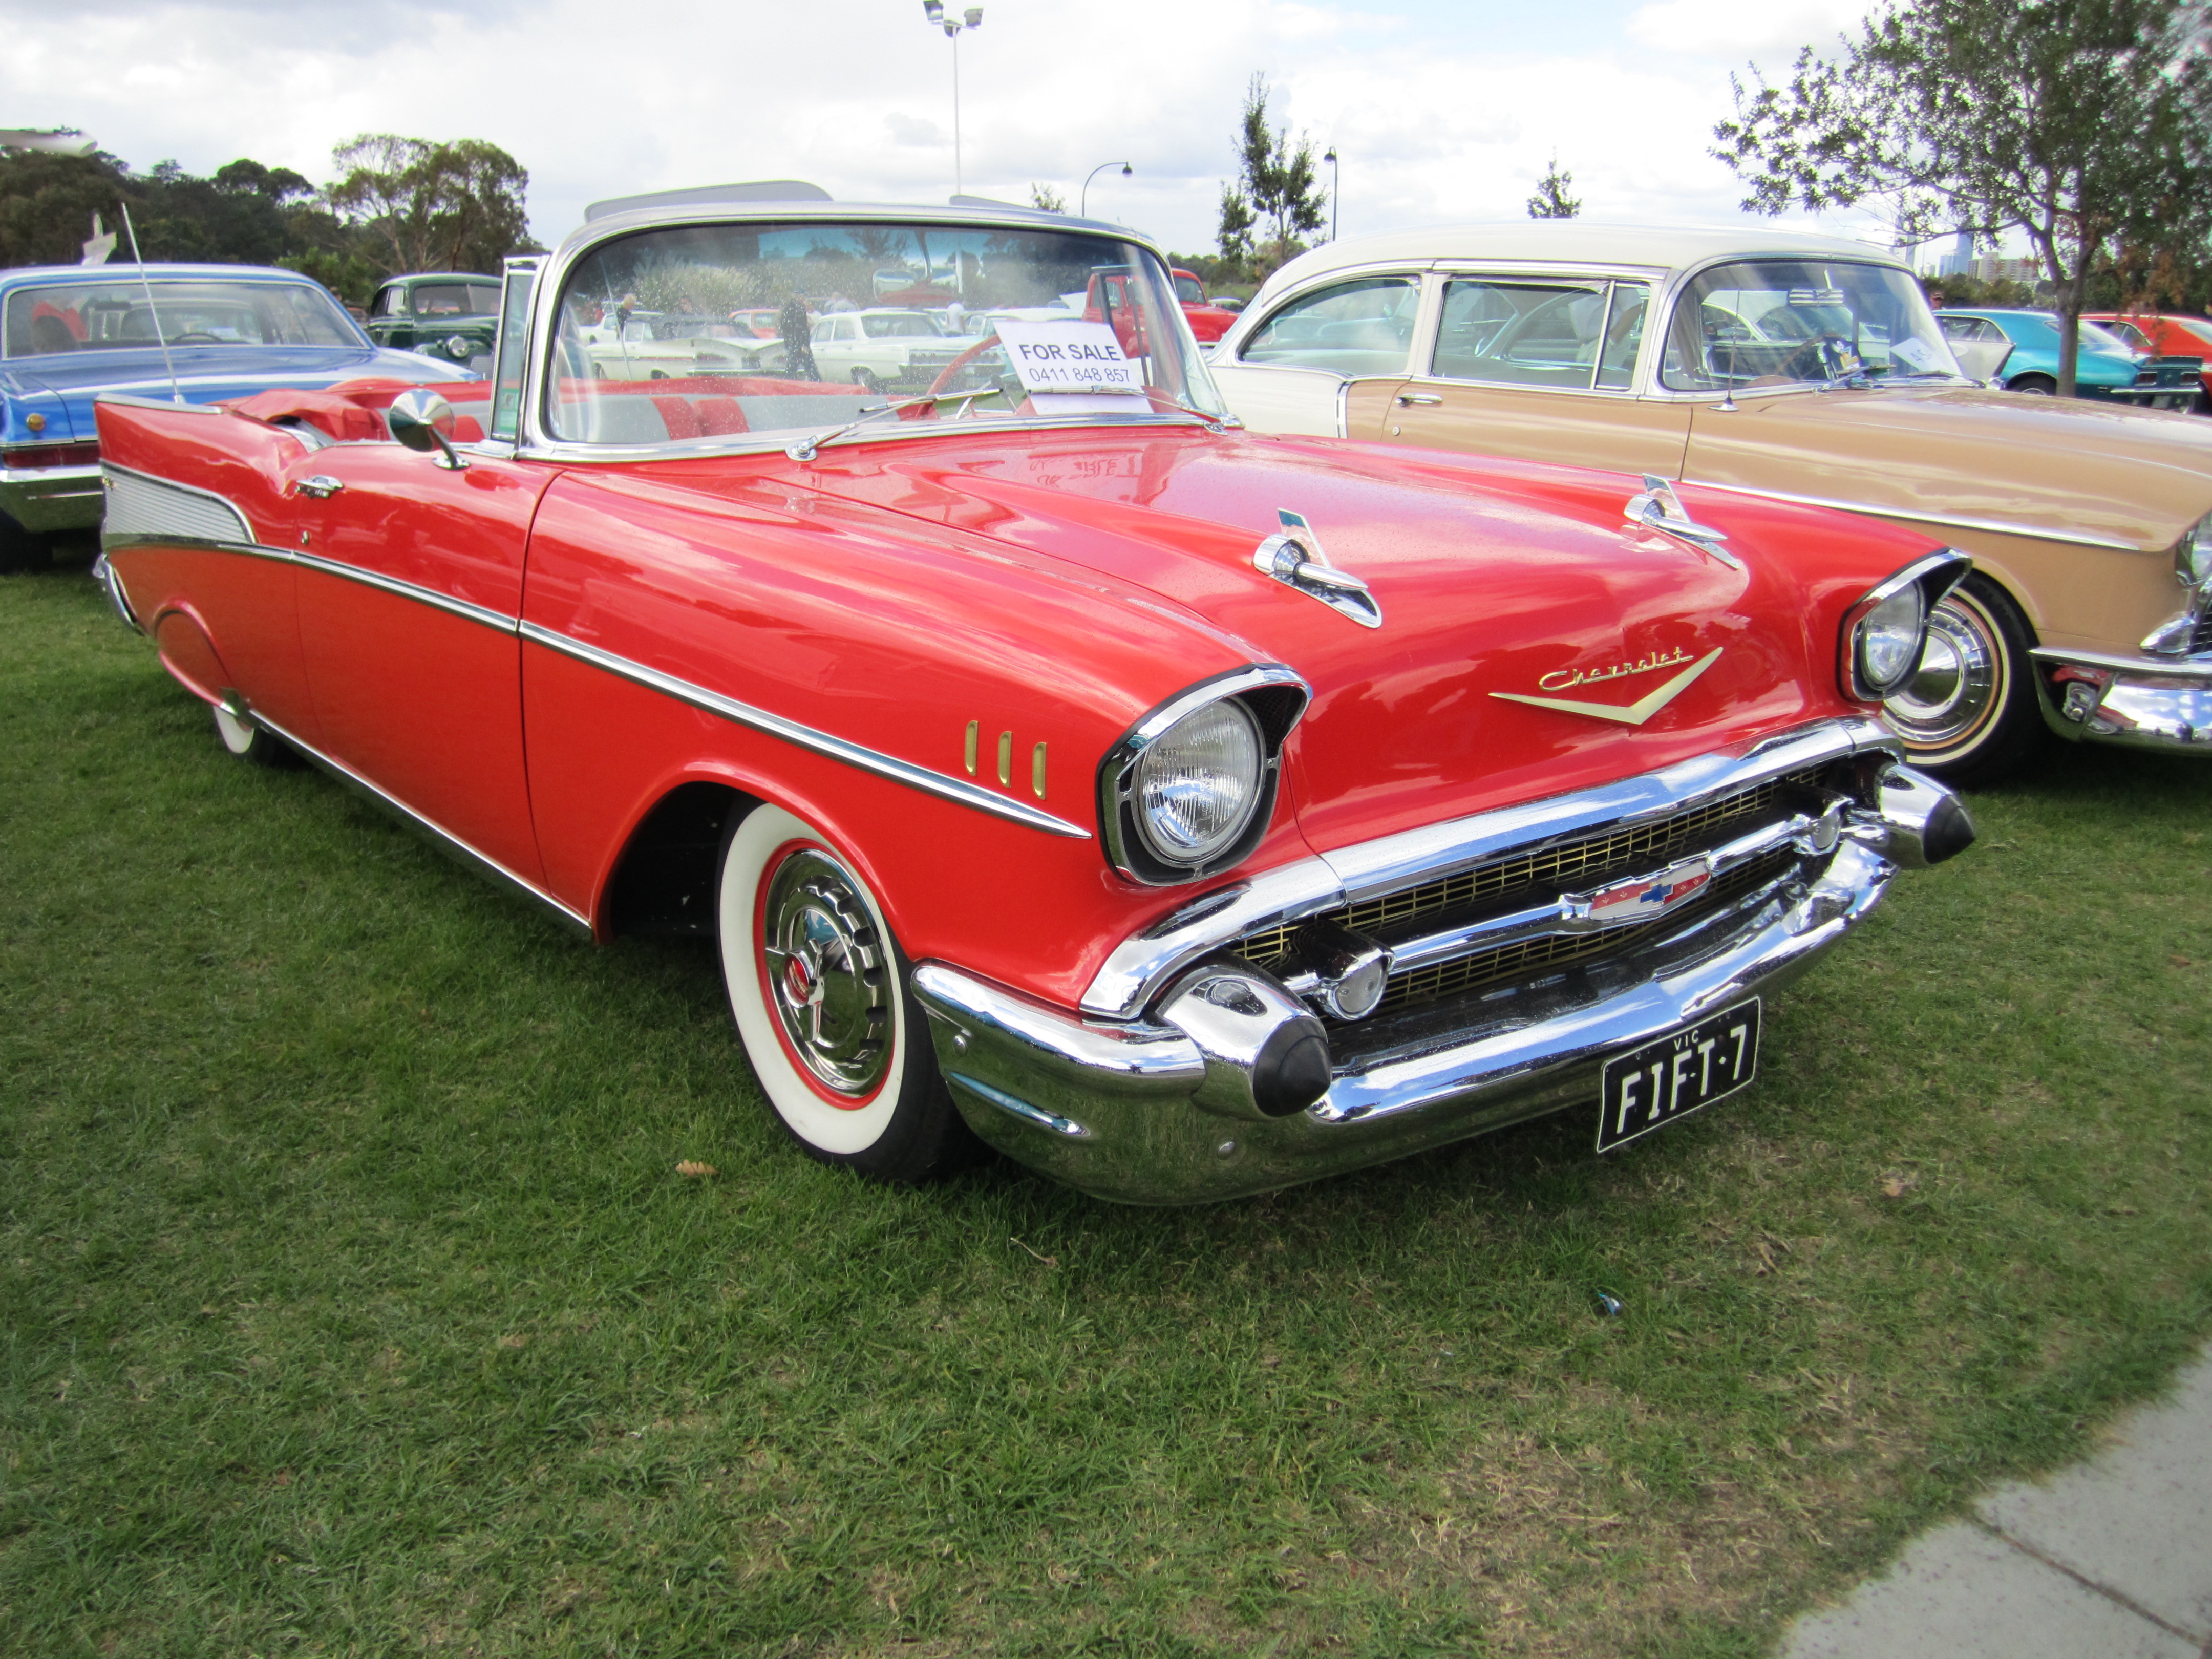 Nice Images Collection: Chevrolet Bel Air Convertible Desktop Wallpapers